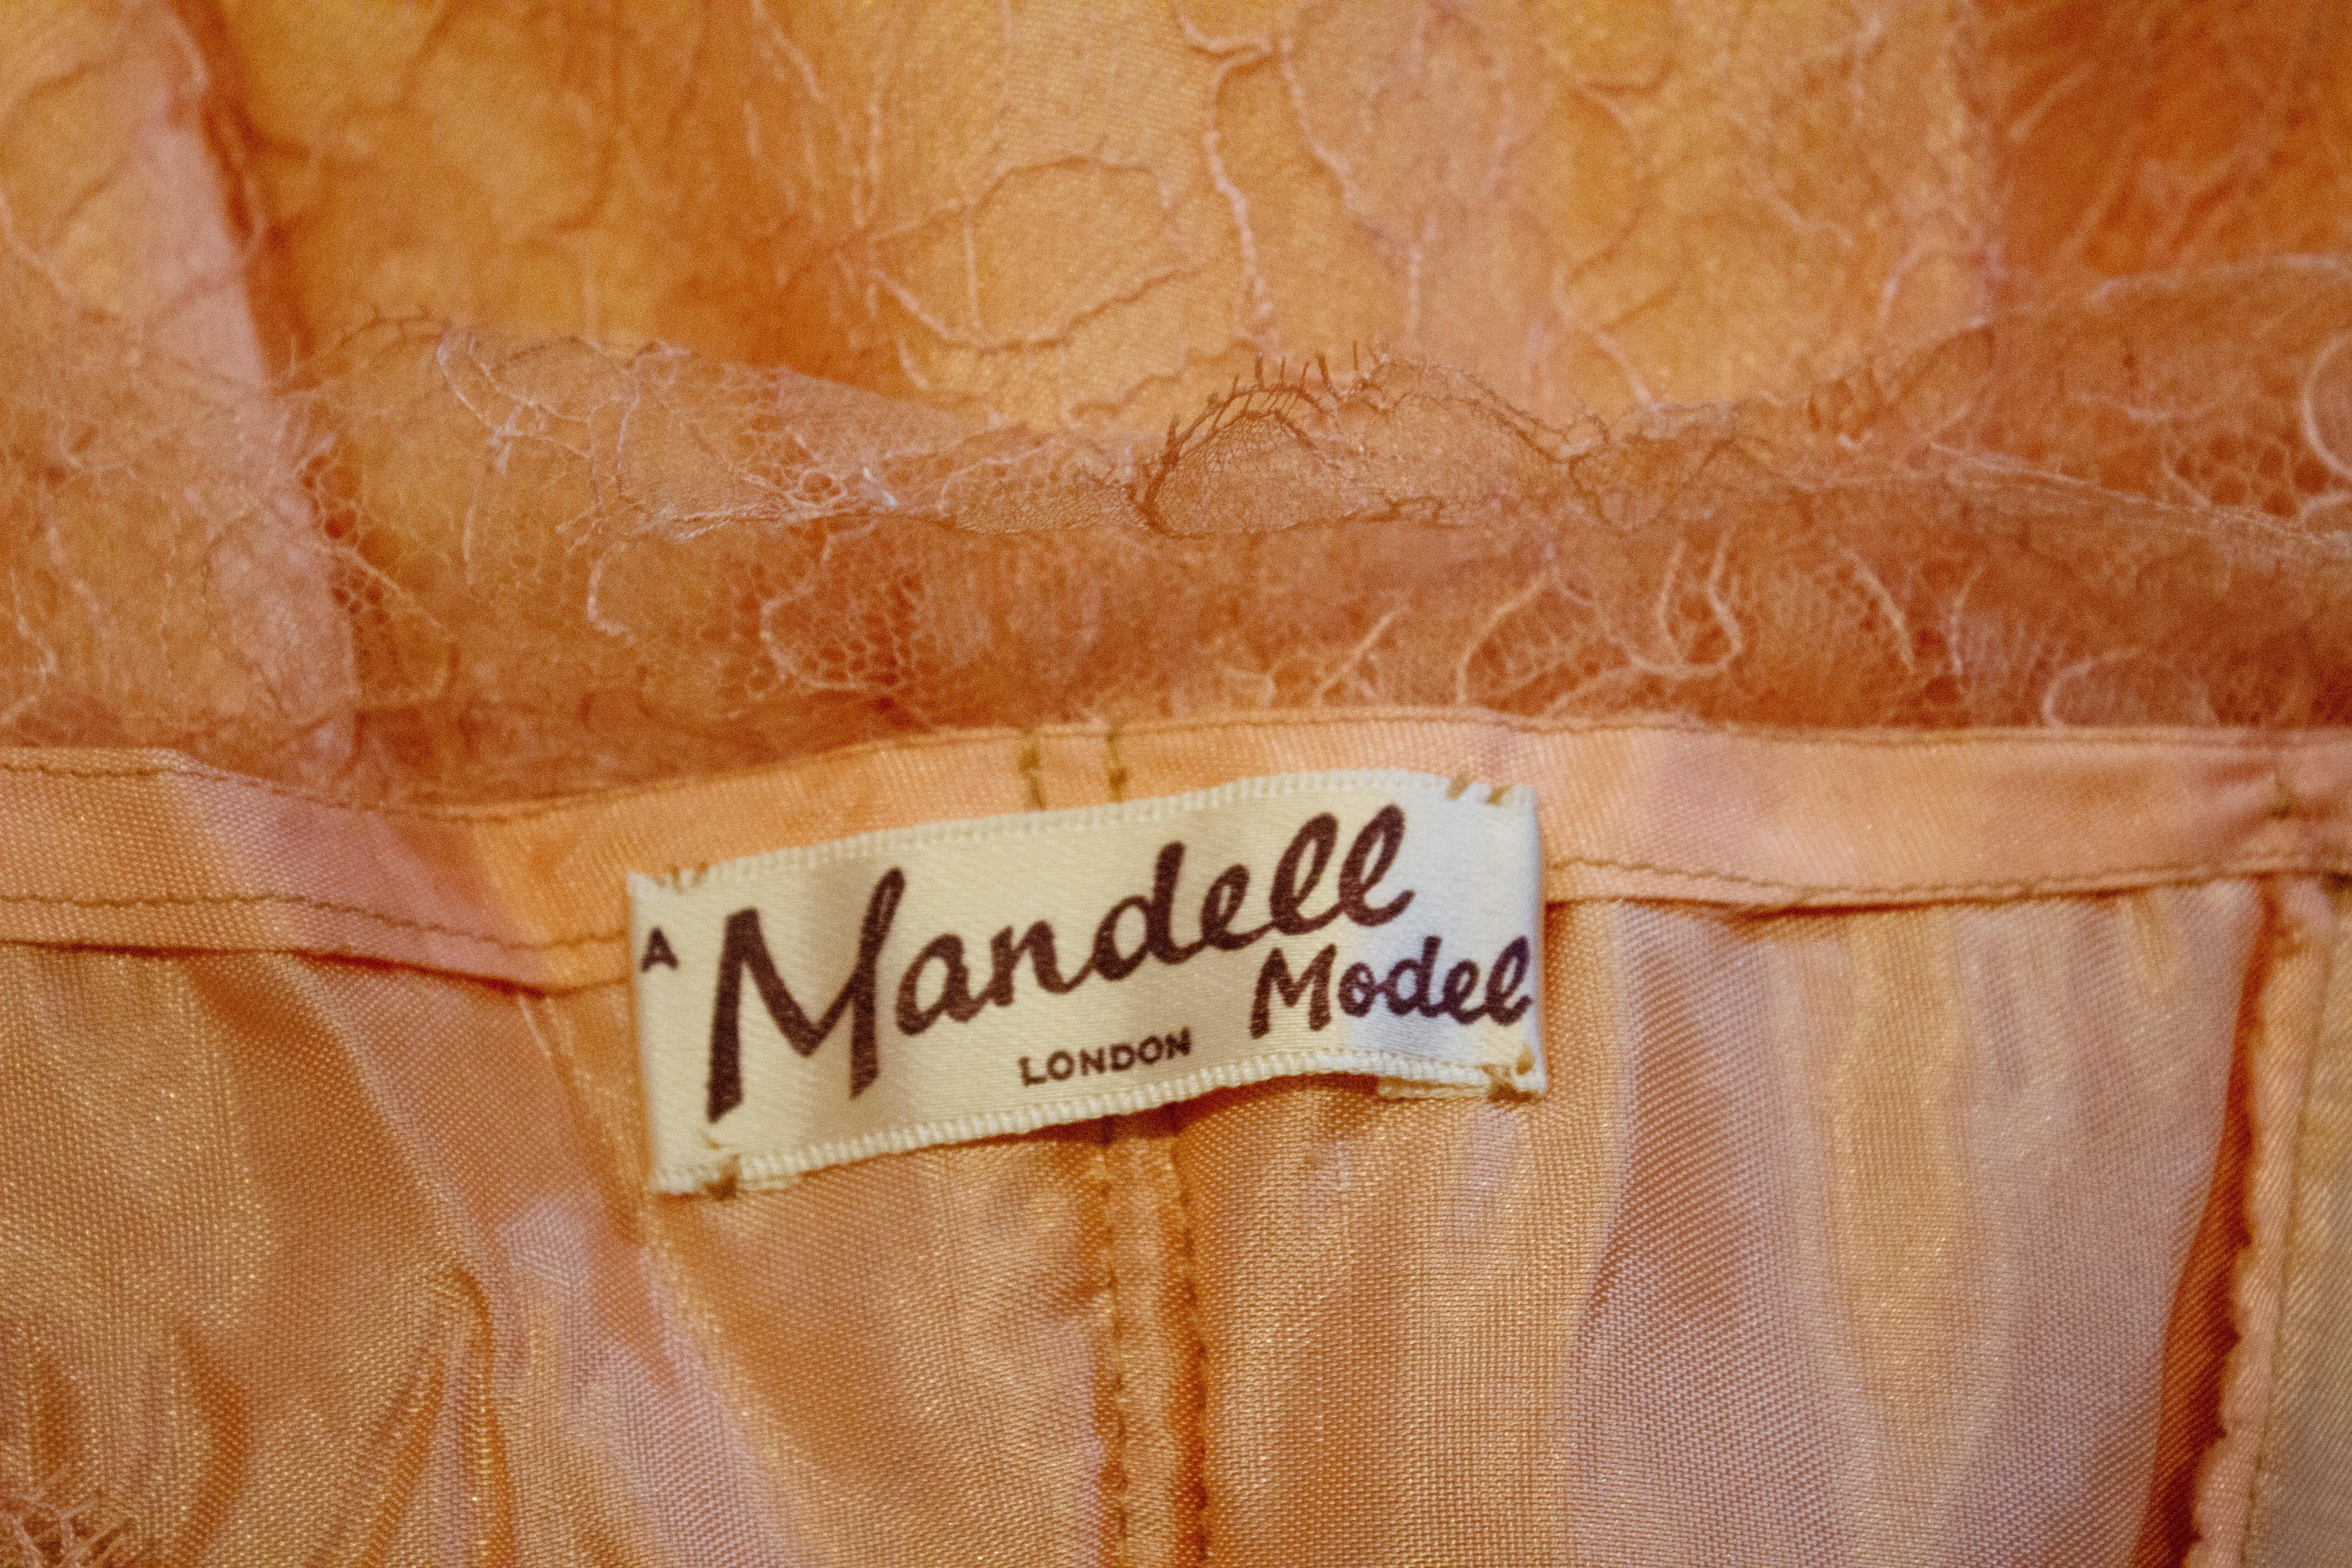 Brown Vintage Mandell Modell London Apricot Lace Dress and Bolero. For Sale